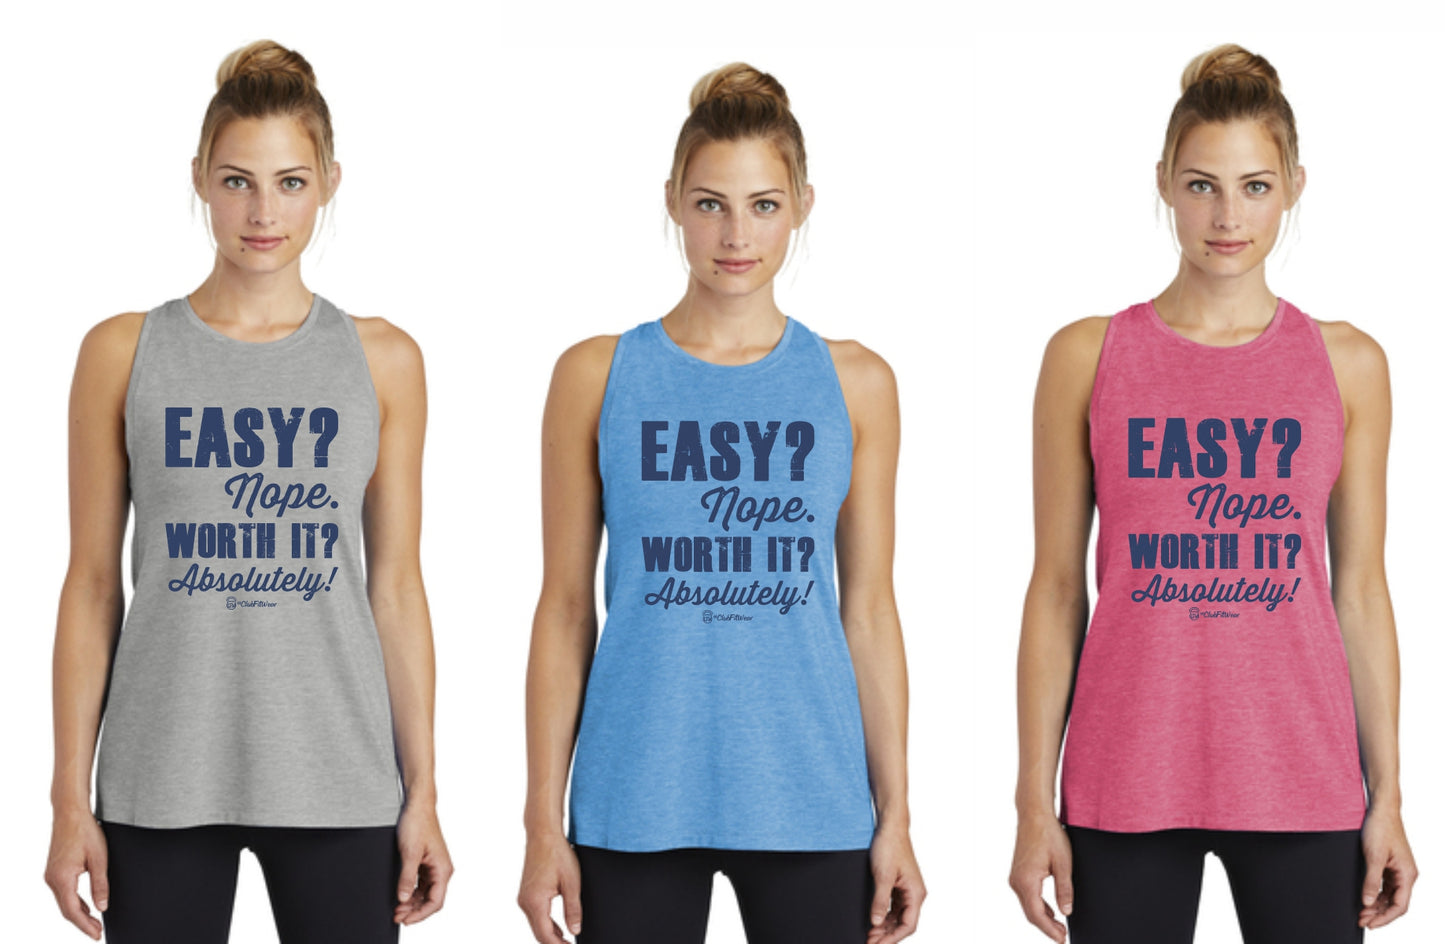 Easy? Nope. Worth it? Absolutely! - Premium Racerback Muscle Tank